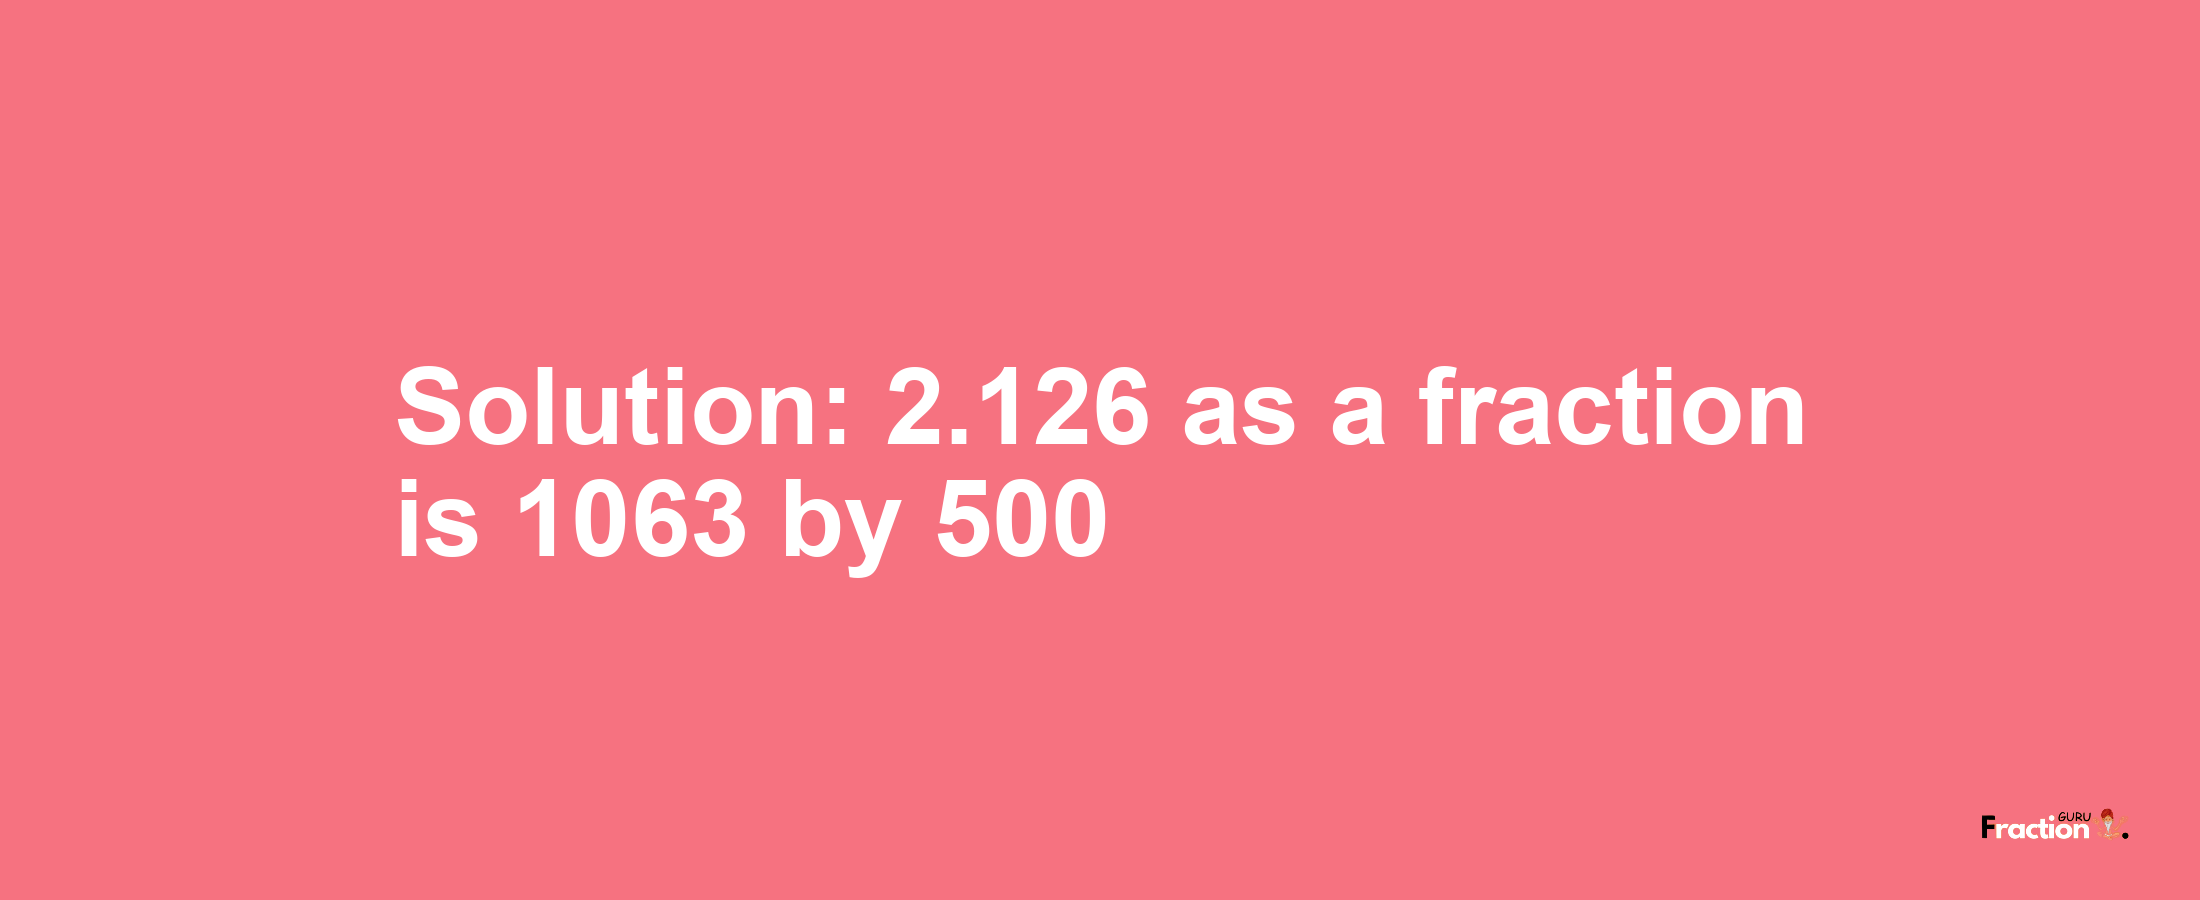 Solution:2.126 as a fraction is 1063/500